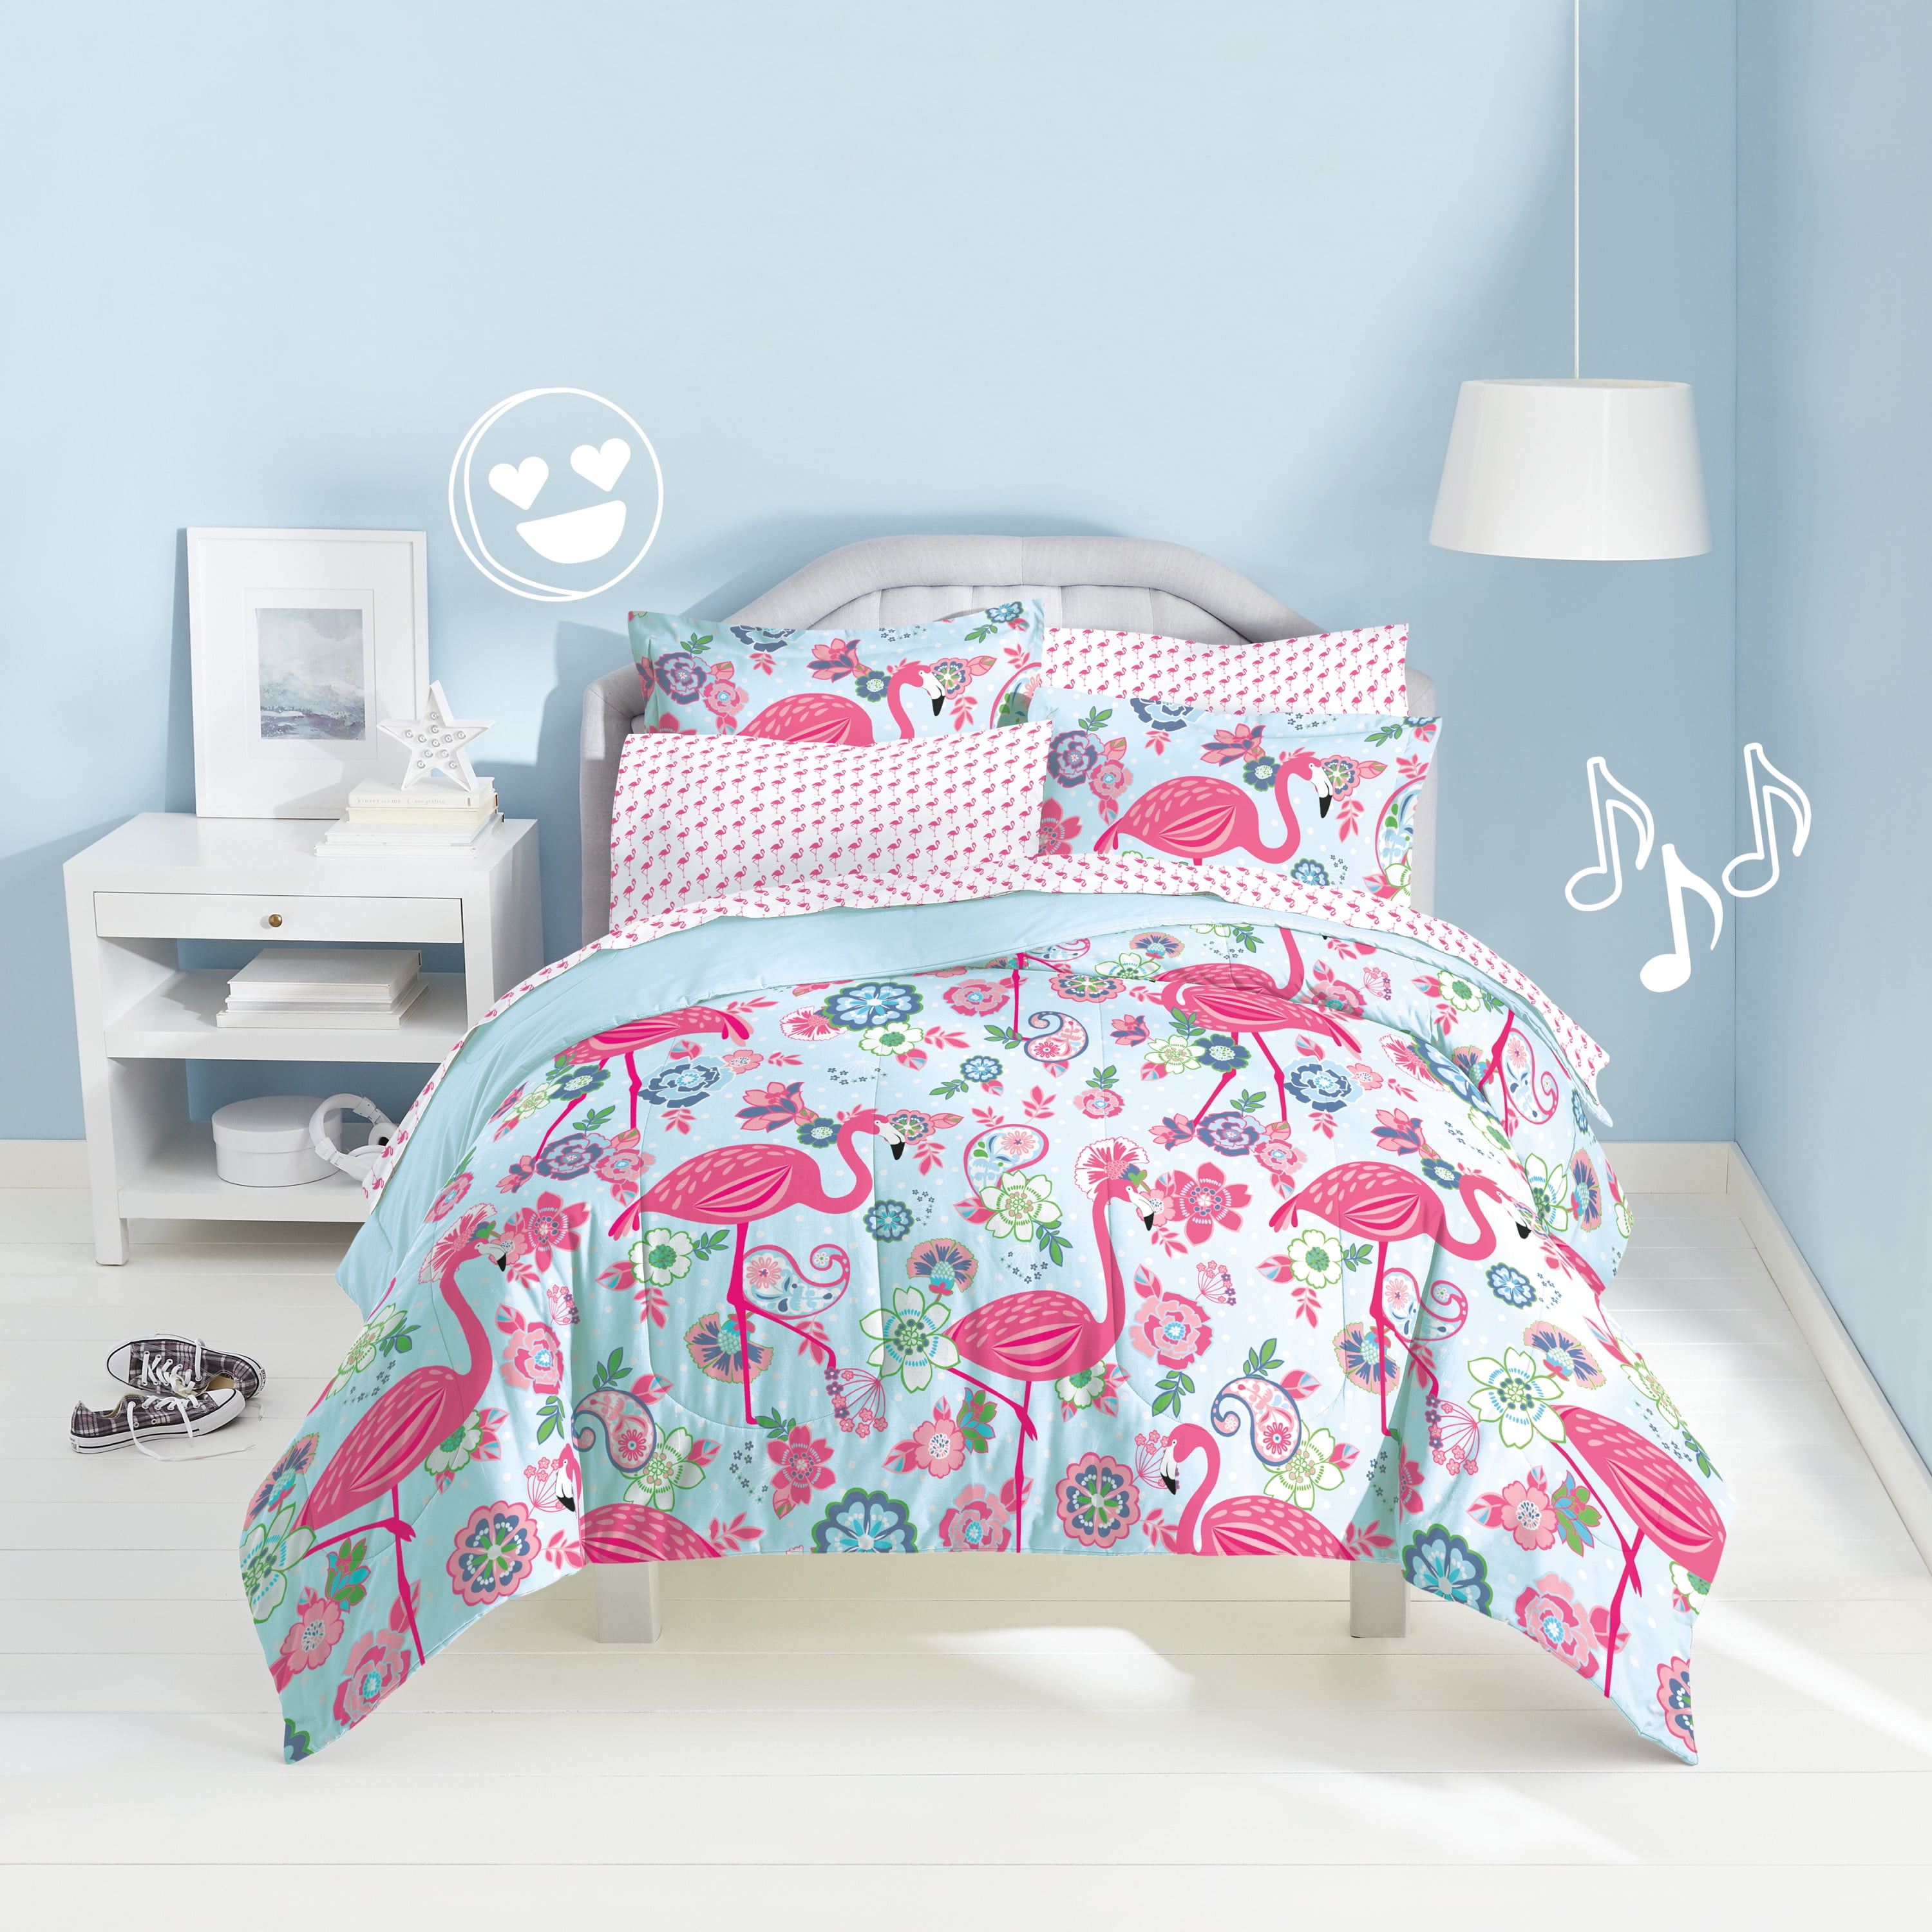 Details about   Heritage Kids Toddler Ultra-Soft Sleepy Unicorn Rainbow Easy-Wash Microfiber Bed